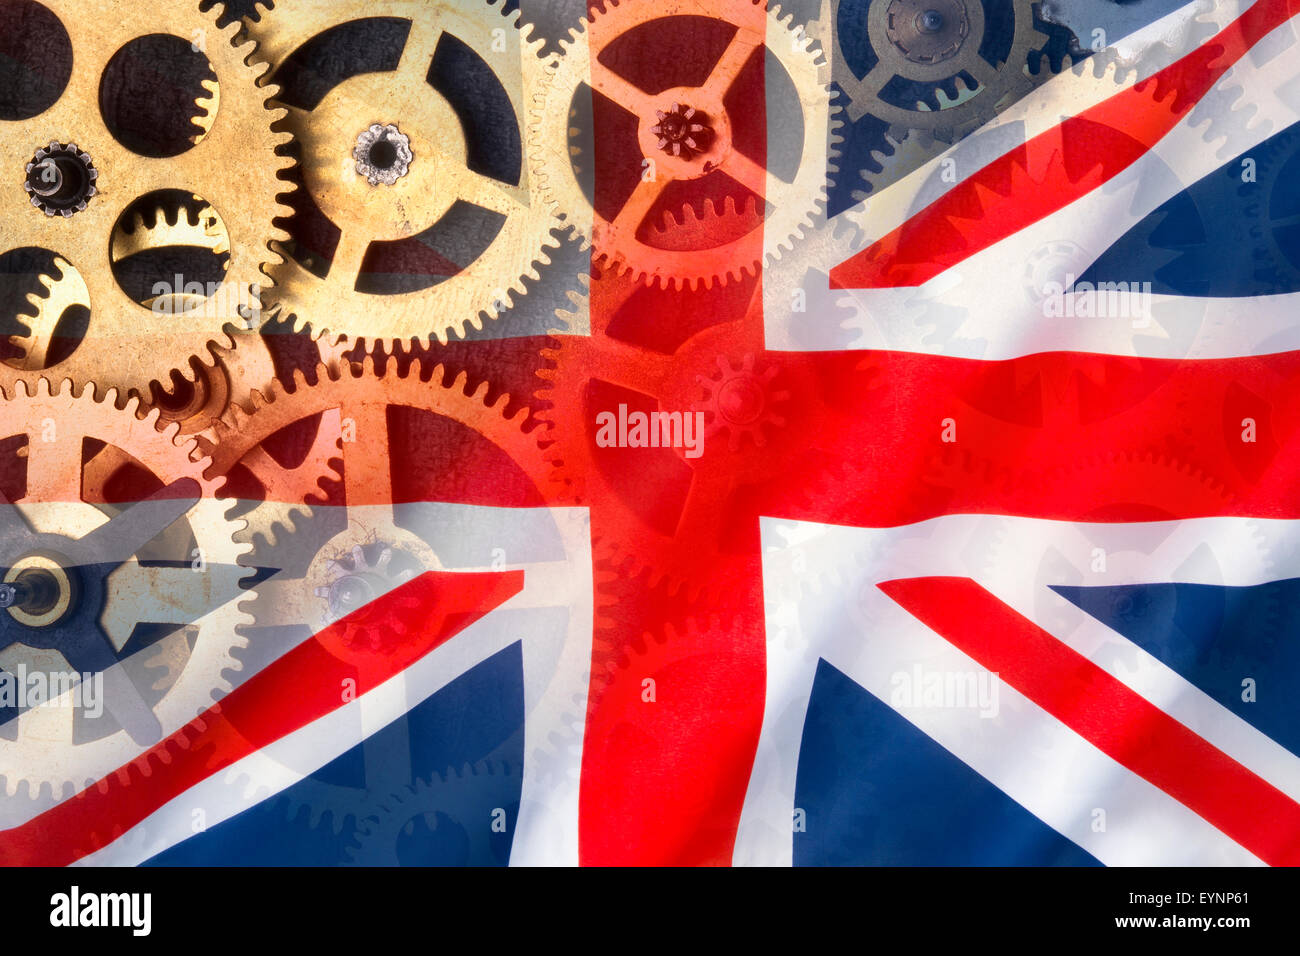 British Engineering and Manufacture - Flag of the United Kingdom. Stock Photo